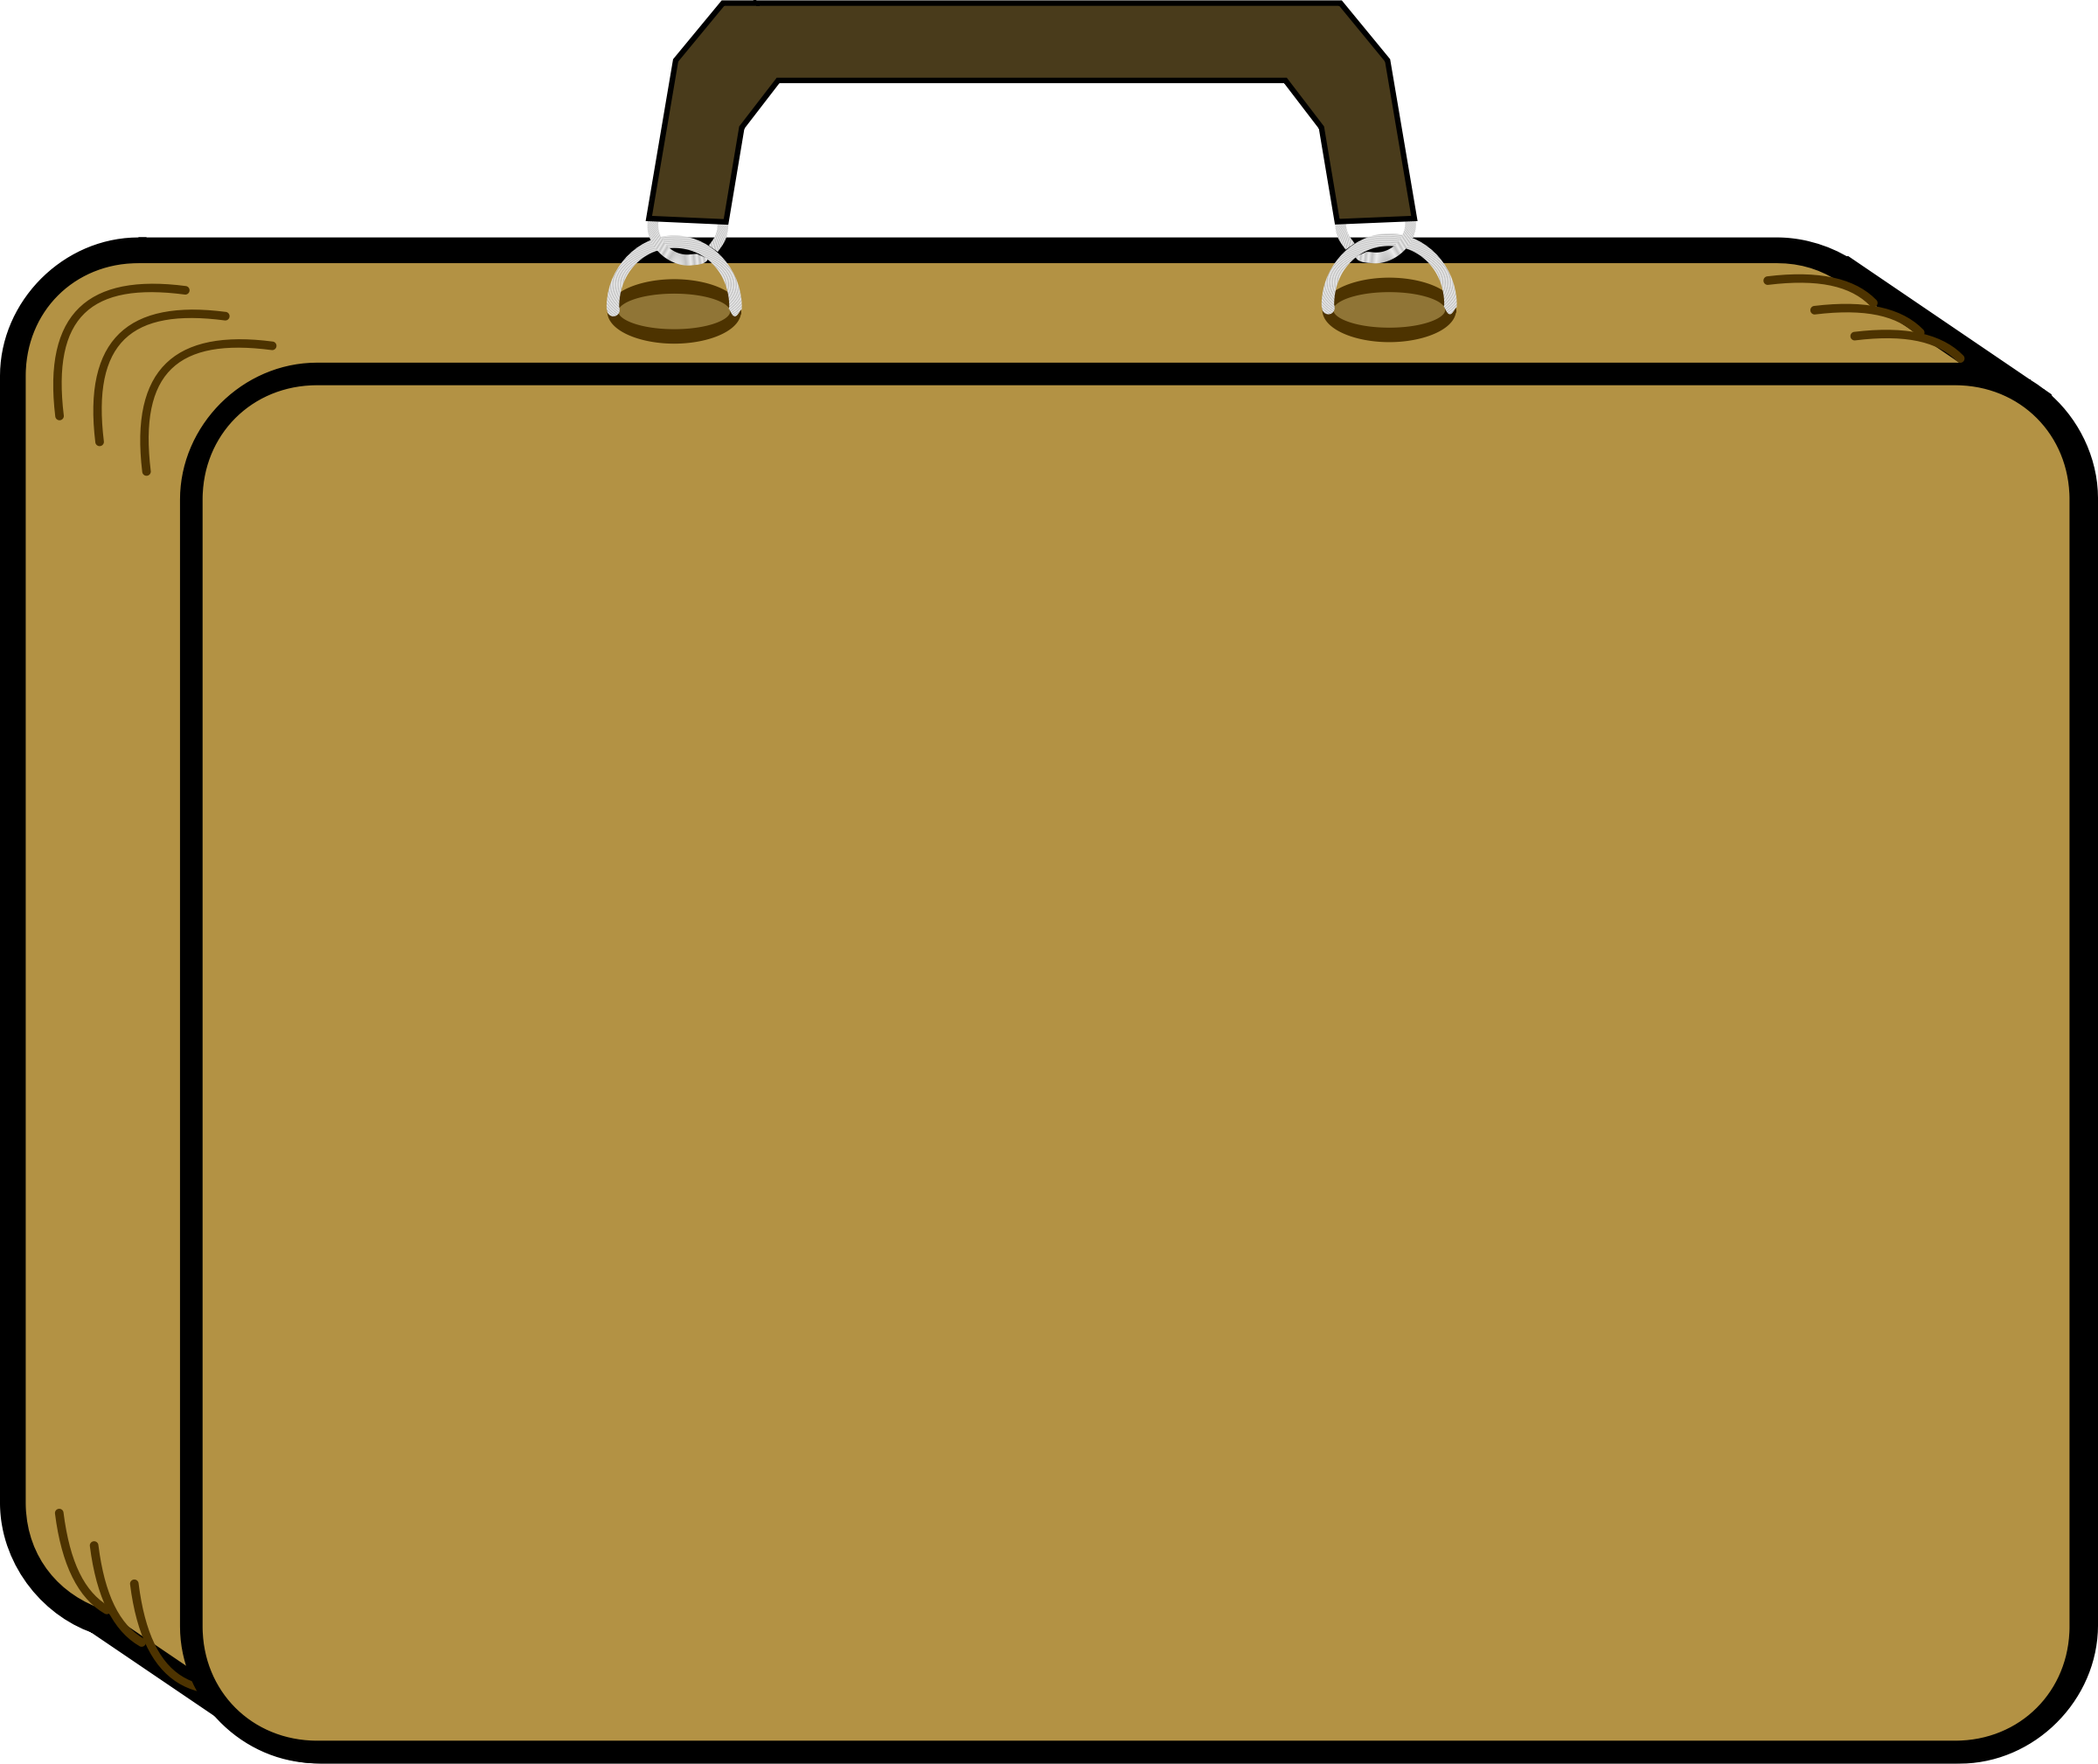 Suitcase clipart packing.